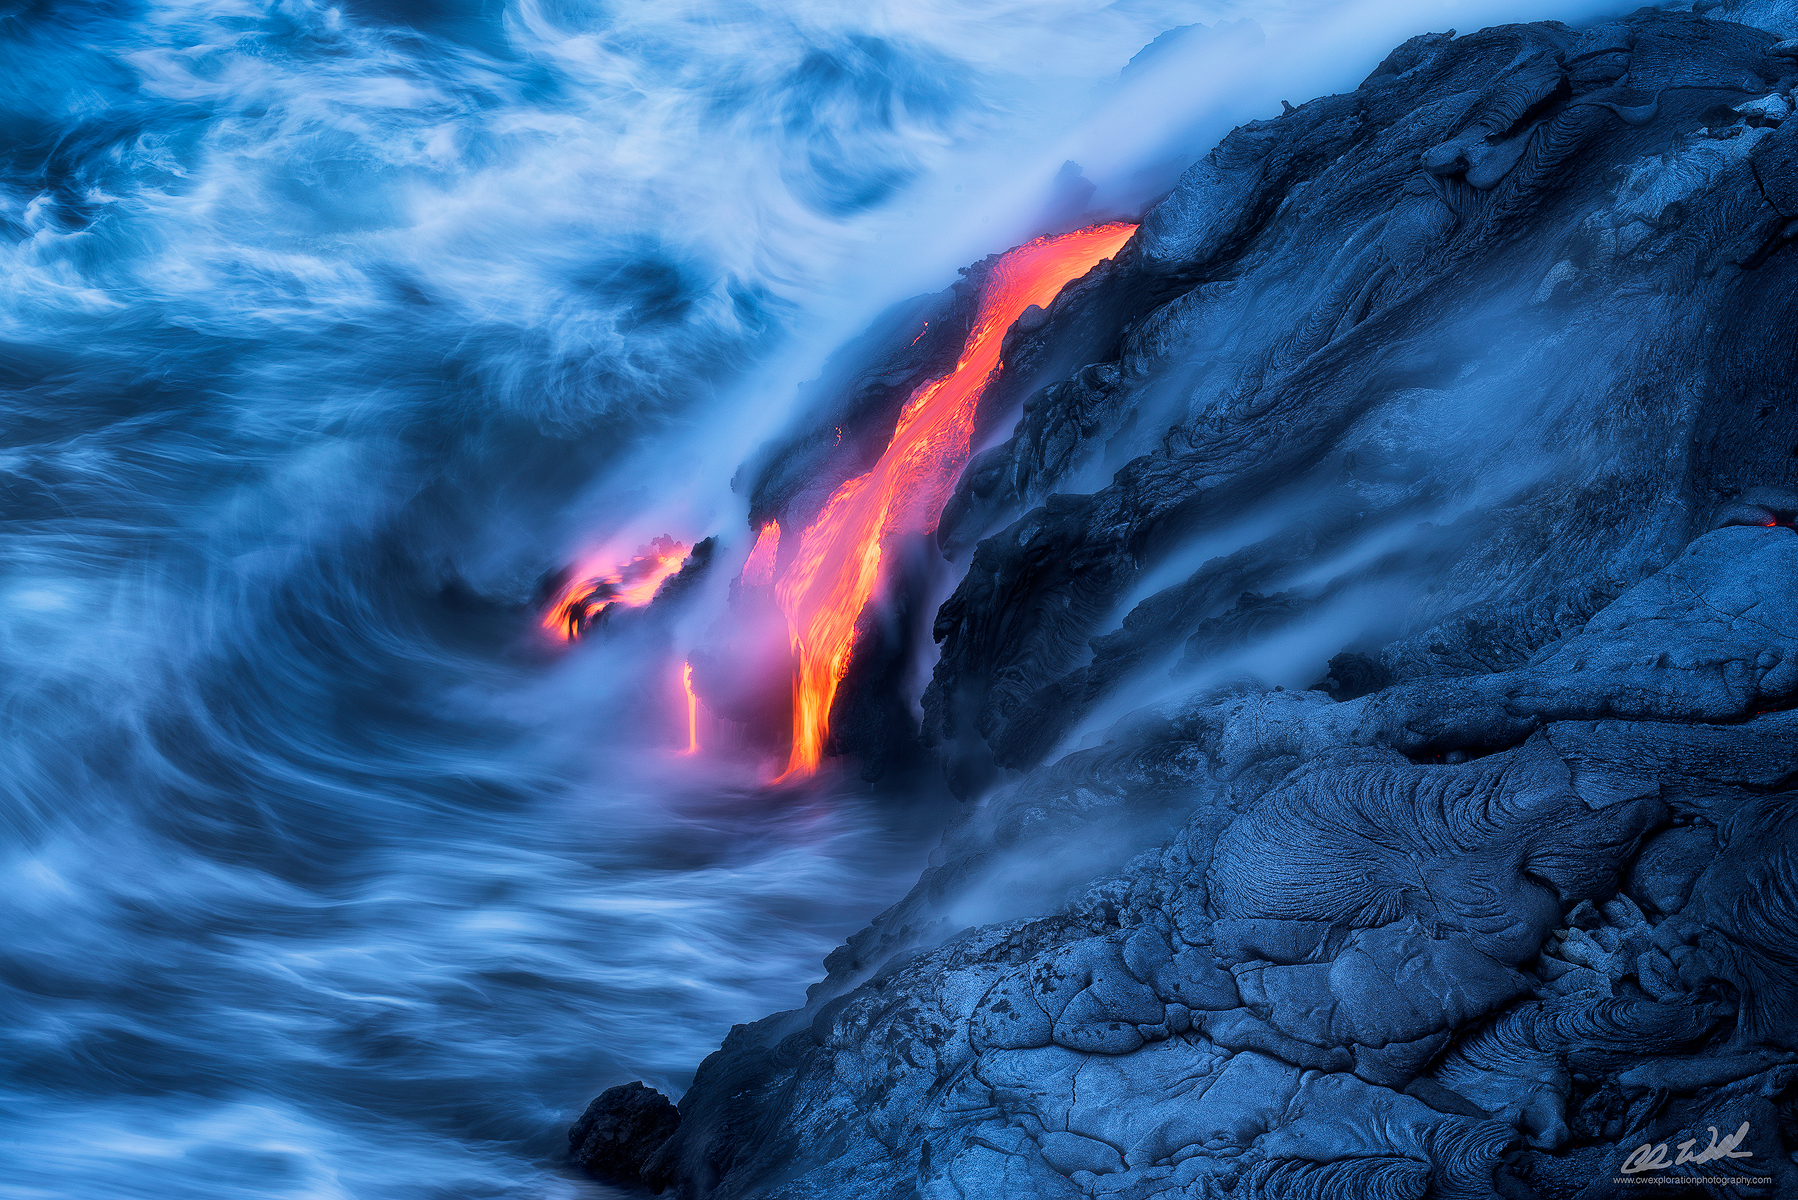 Hawaii: The Land of Lava and Waterfalls